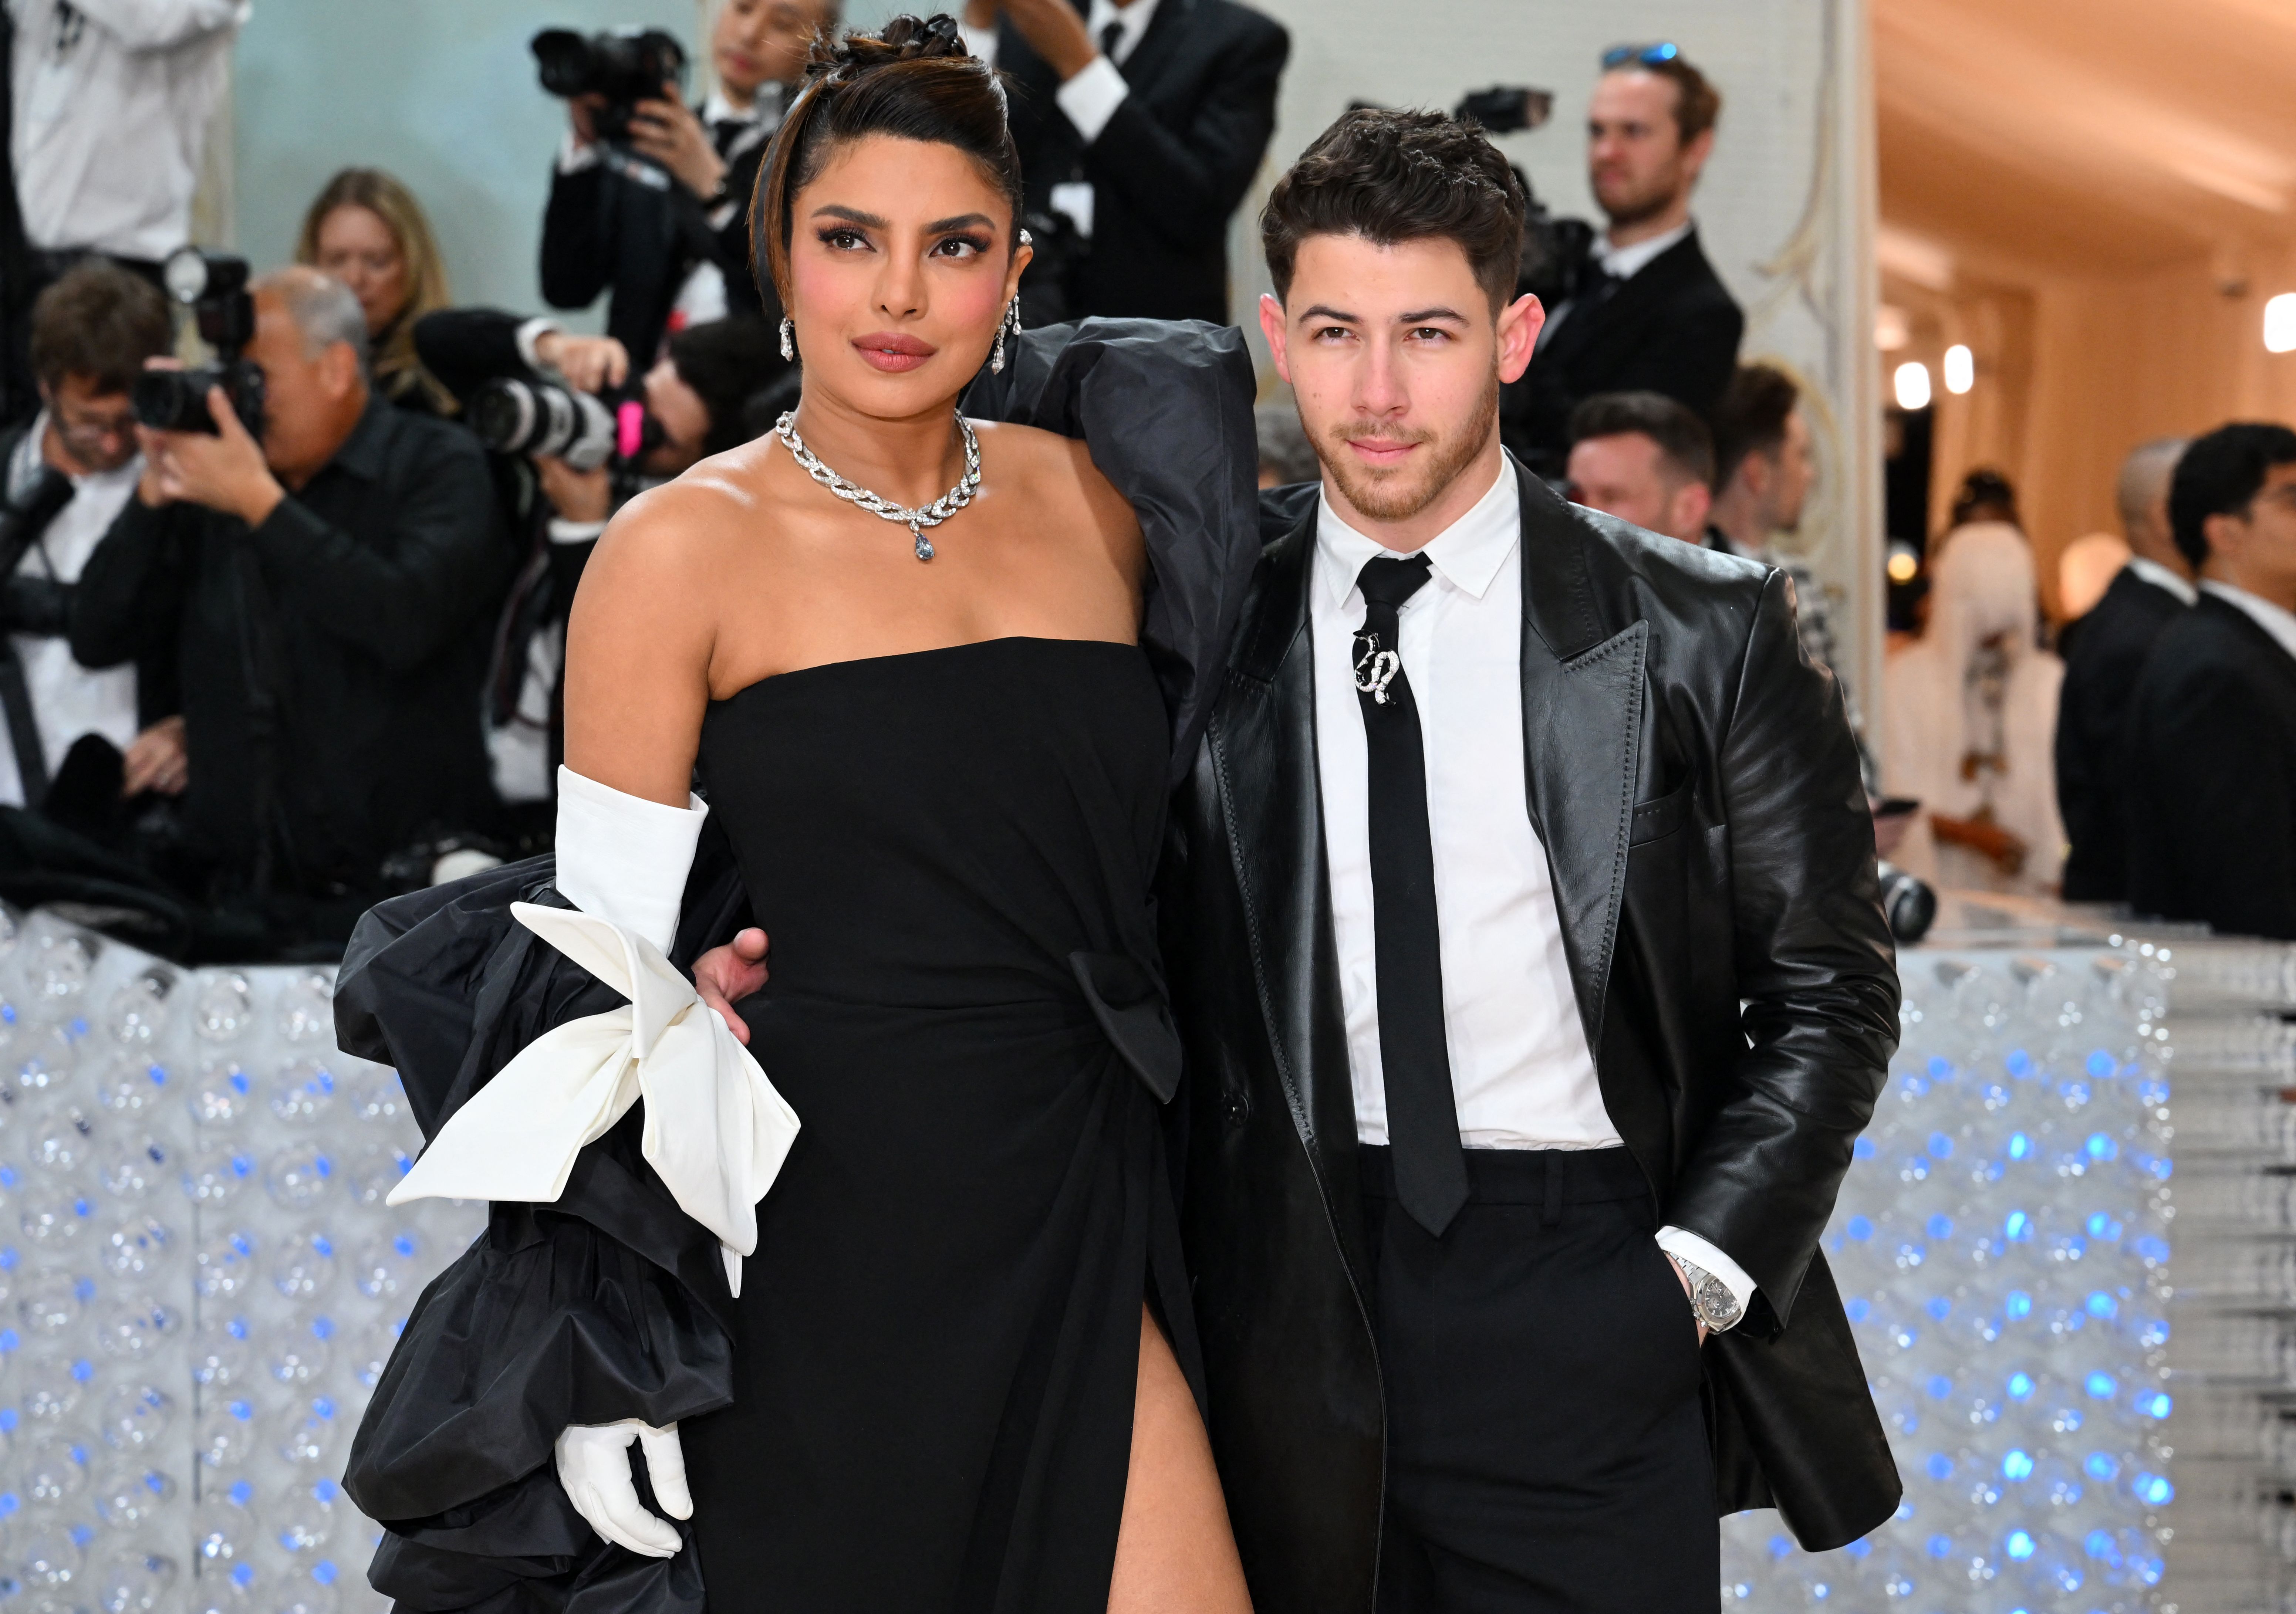 Nick pictured with wife  Priyanka Chopra at an event in May 2023